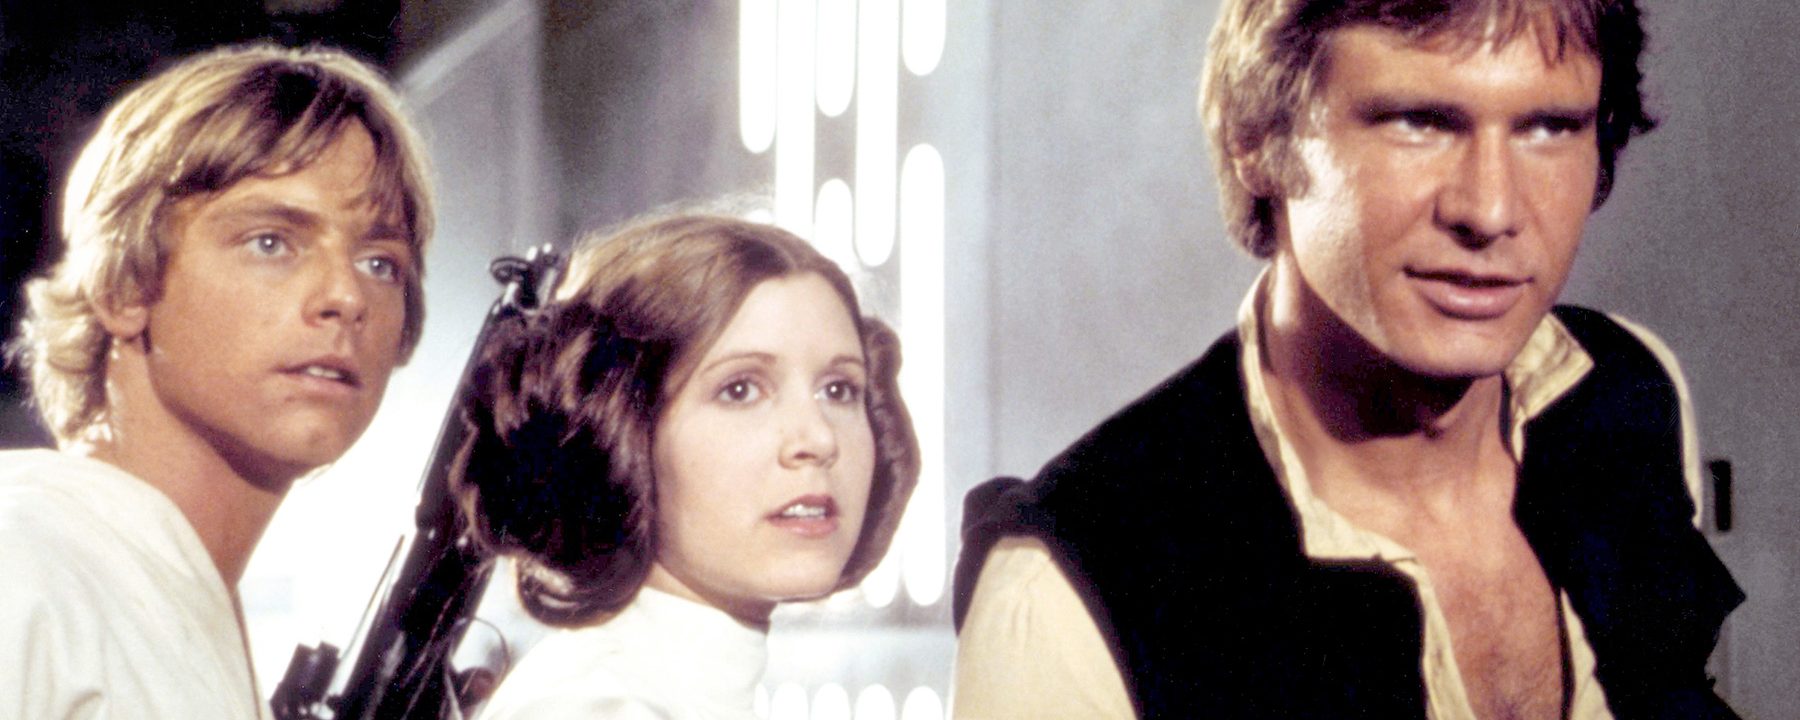 Fans Pay Tribute to Carrie Fisher on Twitter's 'Star Wars Day'